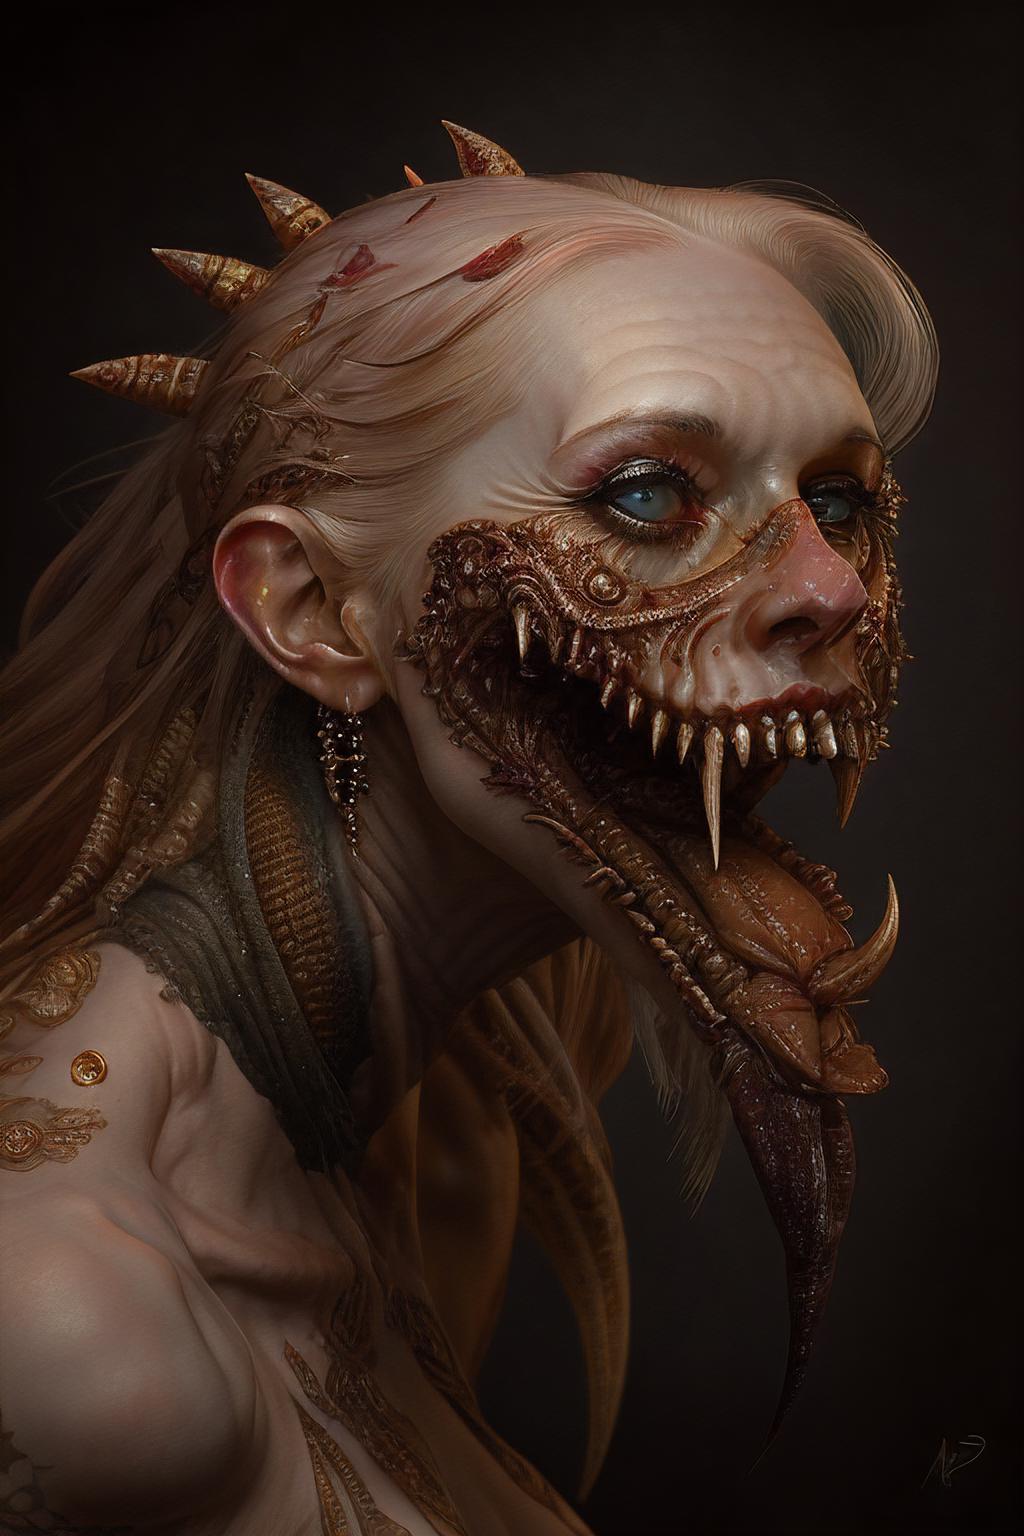 Body Horror Creatures image by KimWithDaPuss